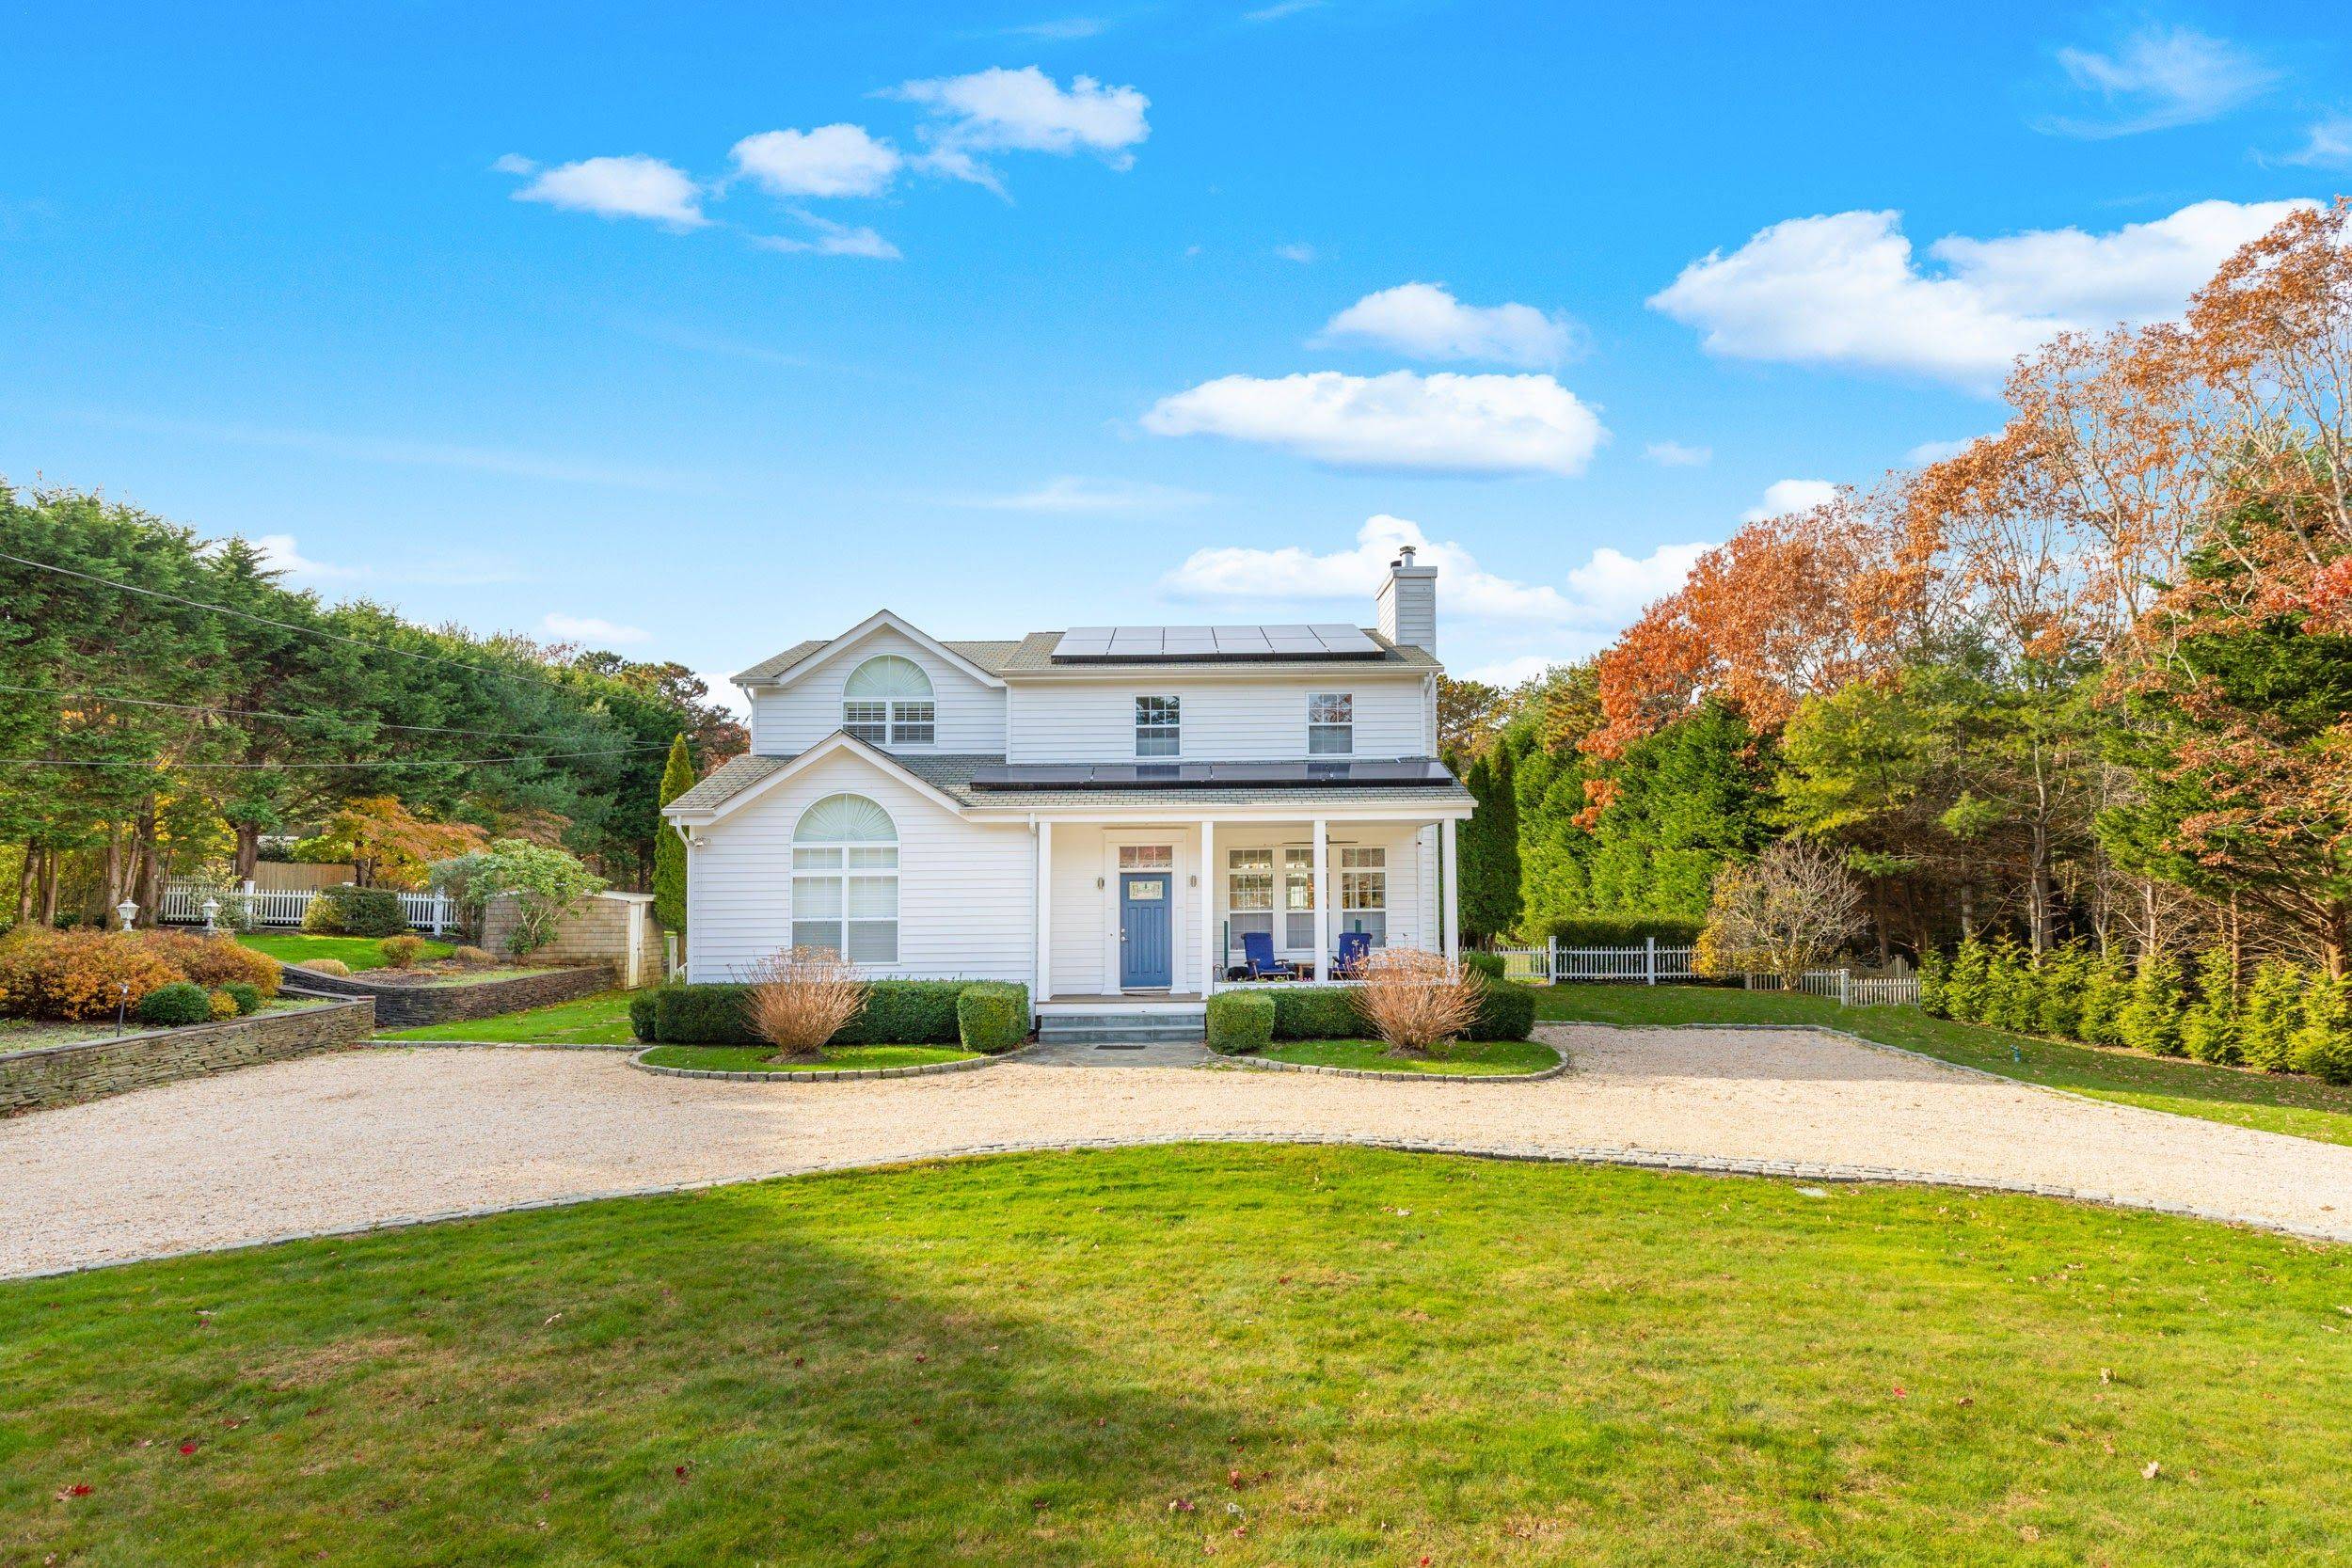 Wainscott - Perfect Getaway! 5 Beds With Pool!